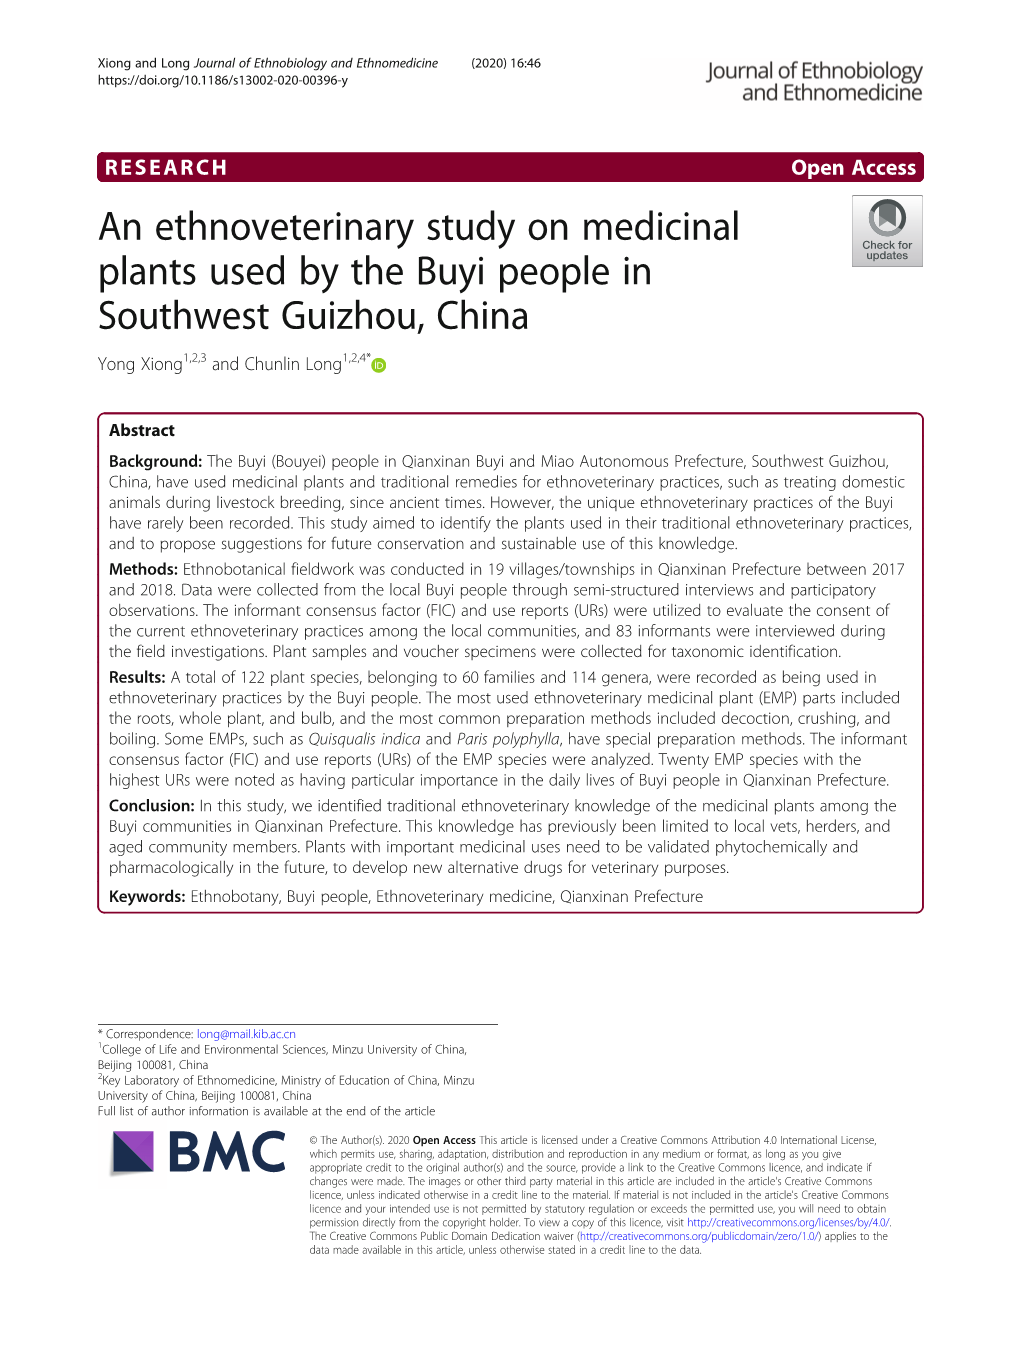 An Ethnoveterinary Study on Medicinal Plants Used by the Buyi People in Southwest Guizhou, China Yong Xiong1,2,3 and Chunlin Long1,2,4*